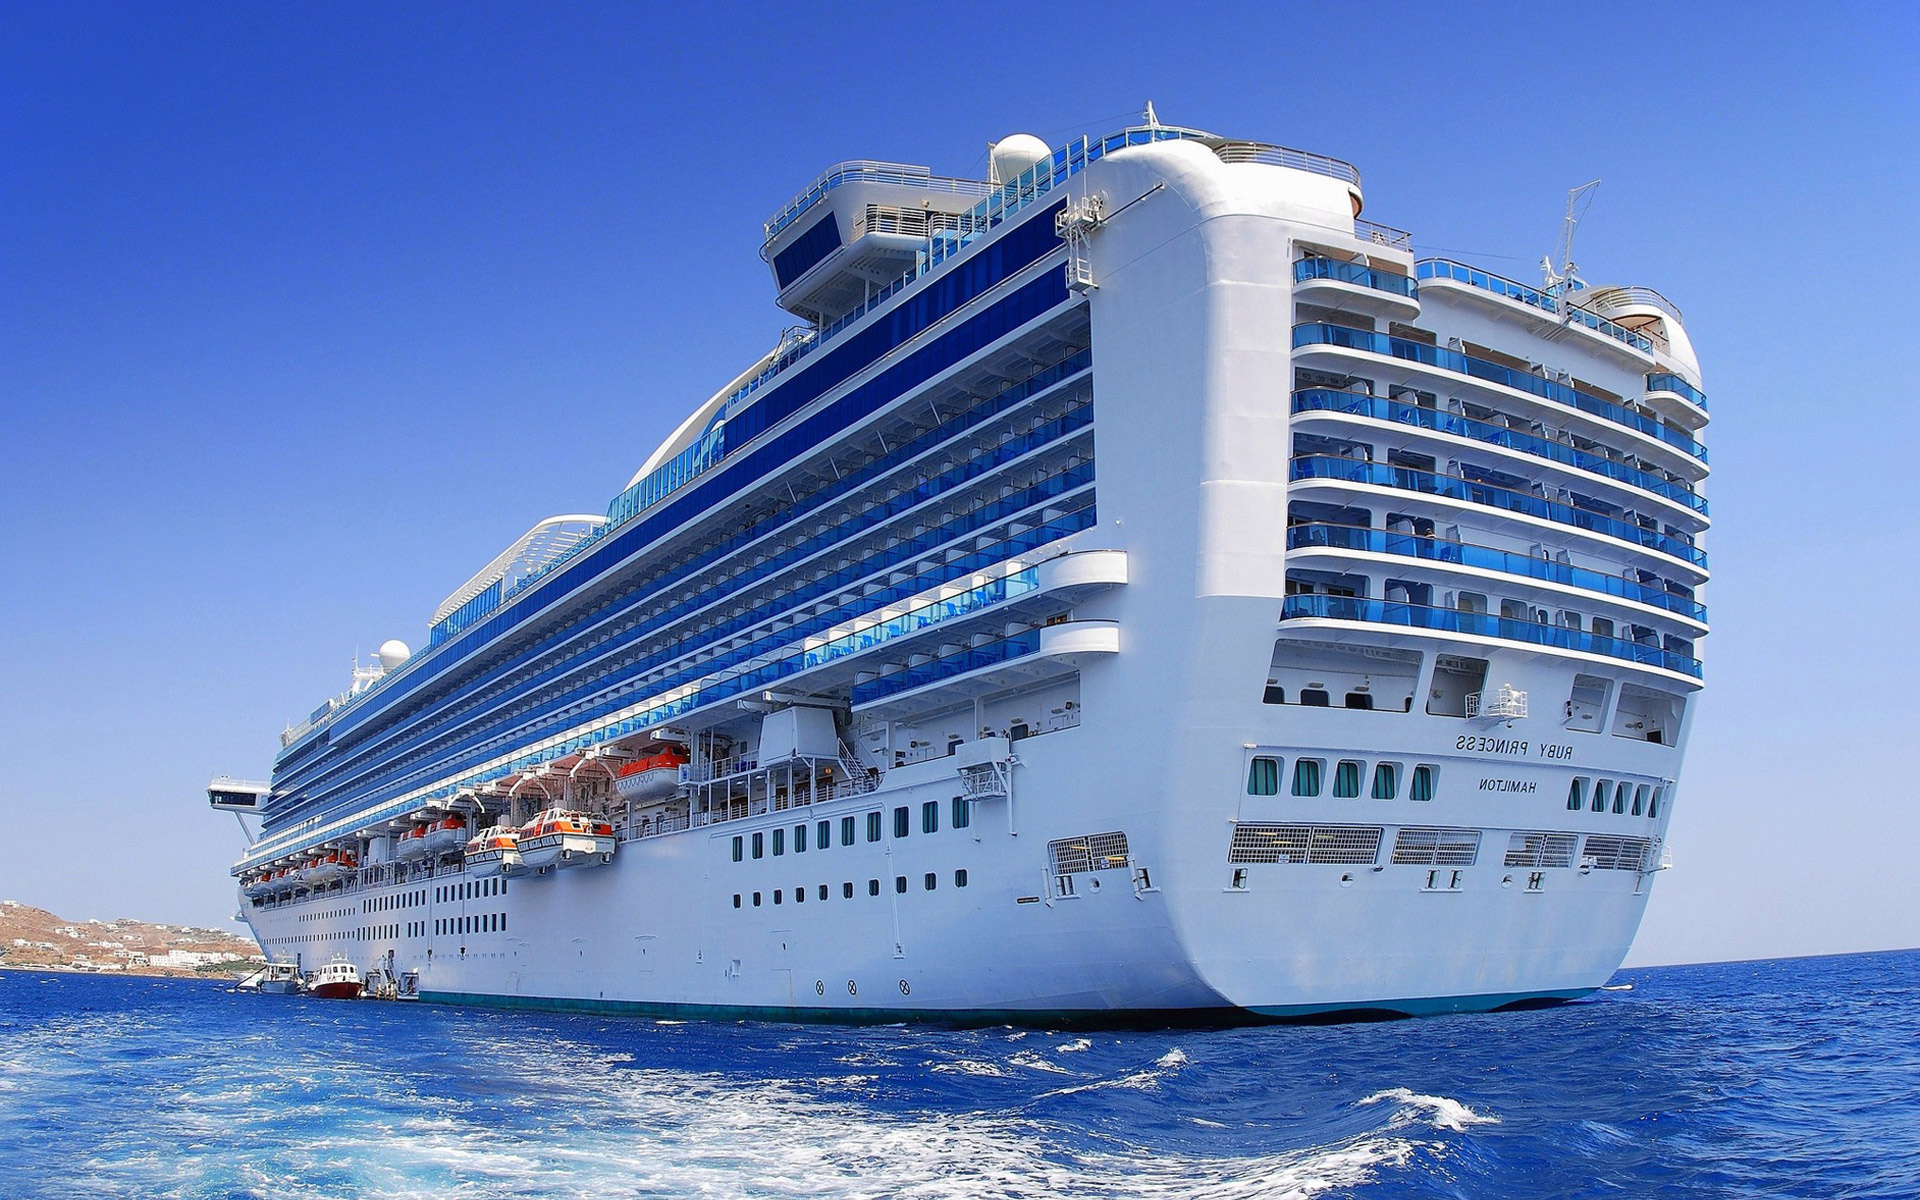 Cruiser (Ship): The Ruby Princess, A large resort vessel built in 2008, On-board entertainment and facilities. 1920x1200 HD Wallpaper.